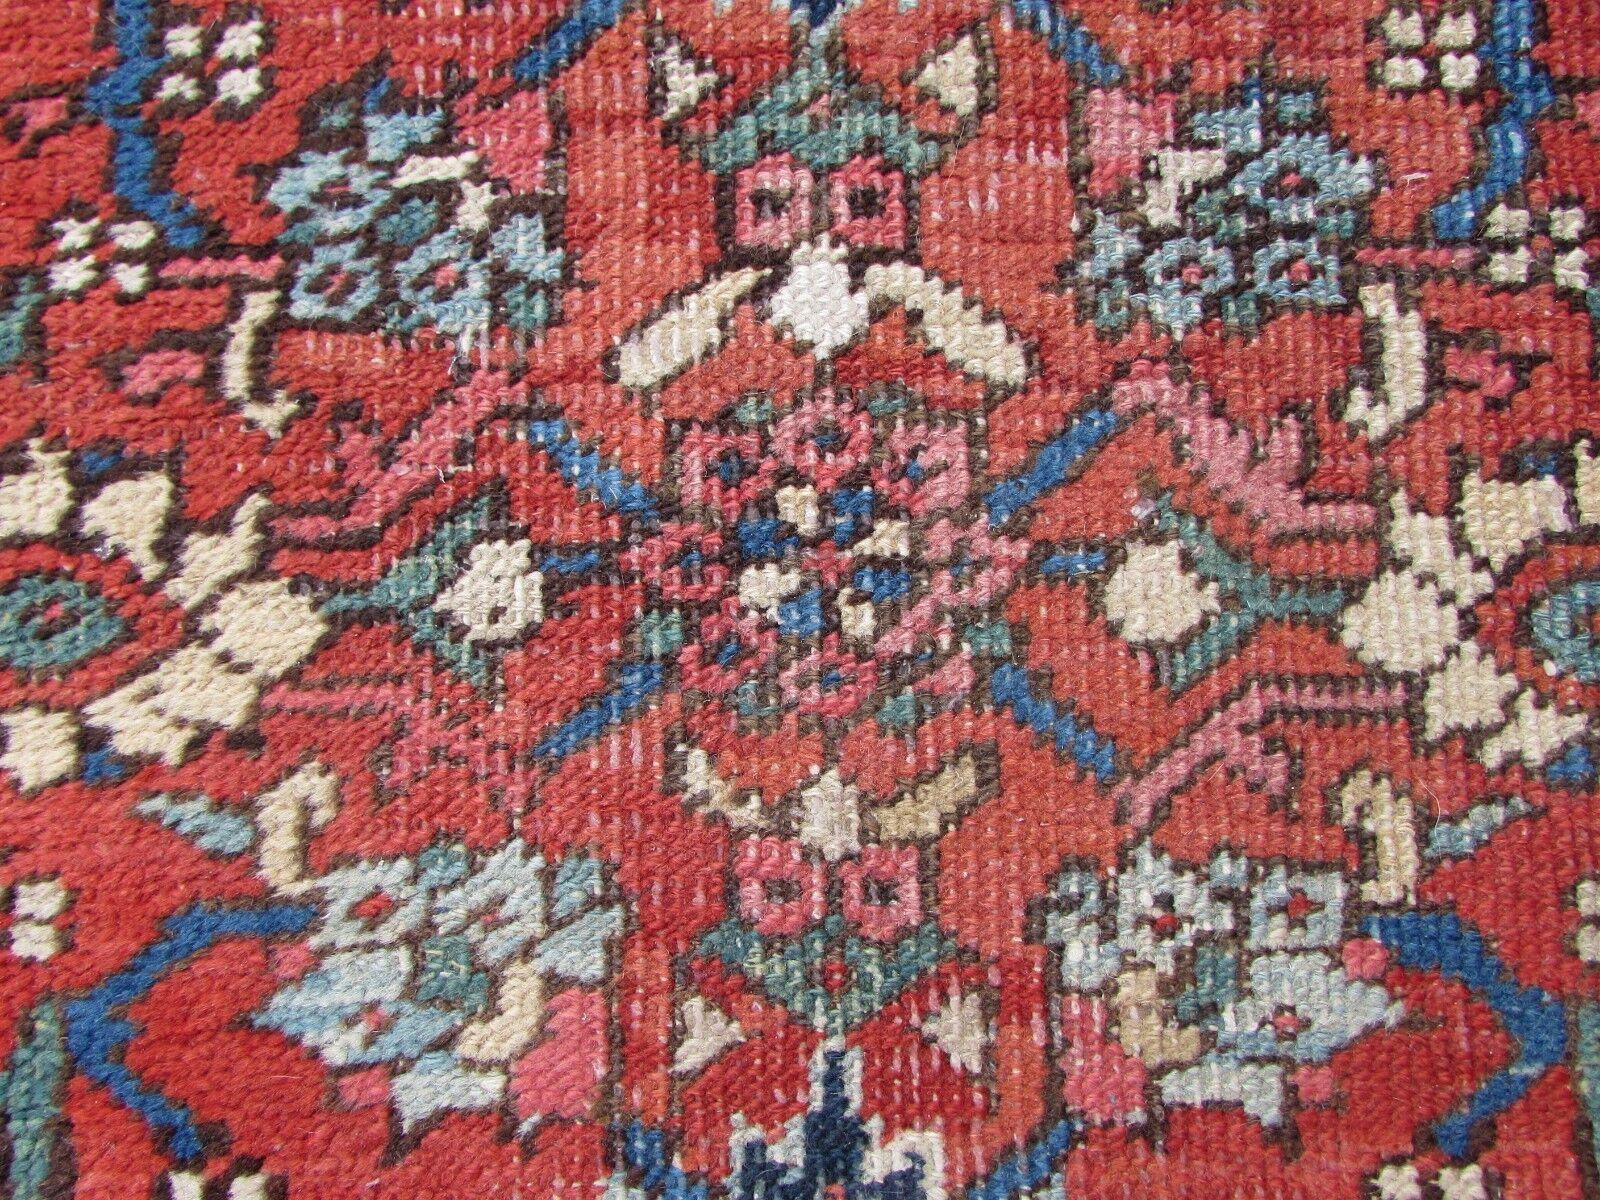 Wool Handmade Antique Persian Style Mahal Runner Rug 2.5' x 12.1', 1920s, 1Q57 For Sale